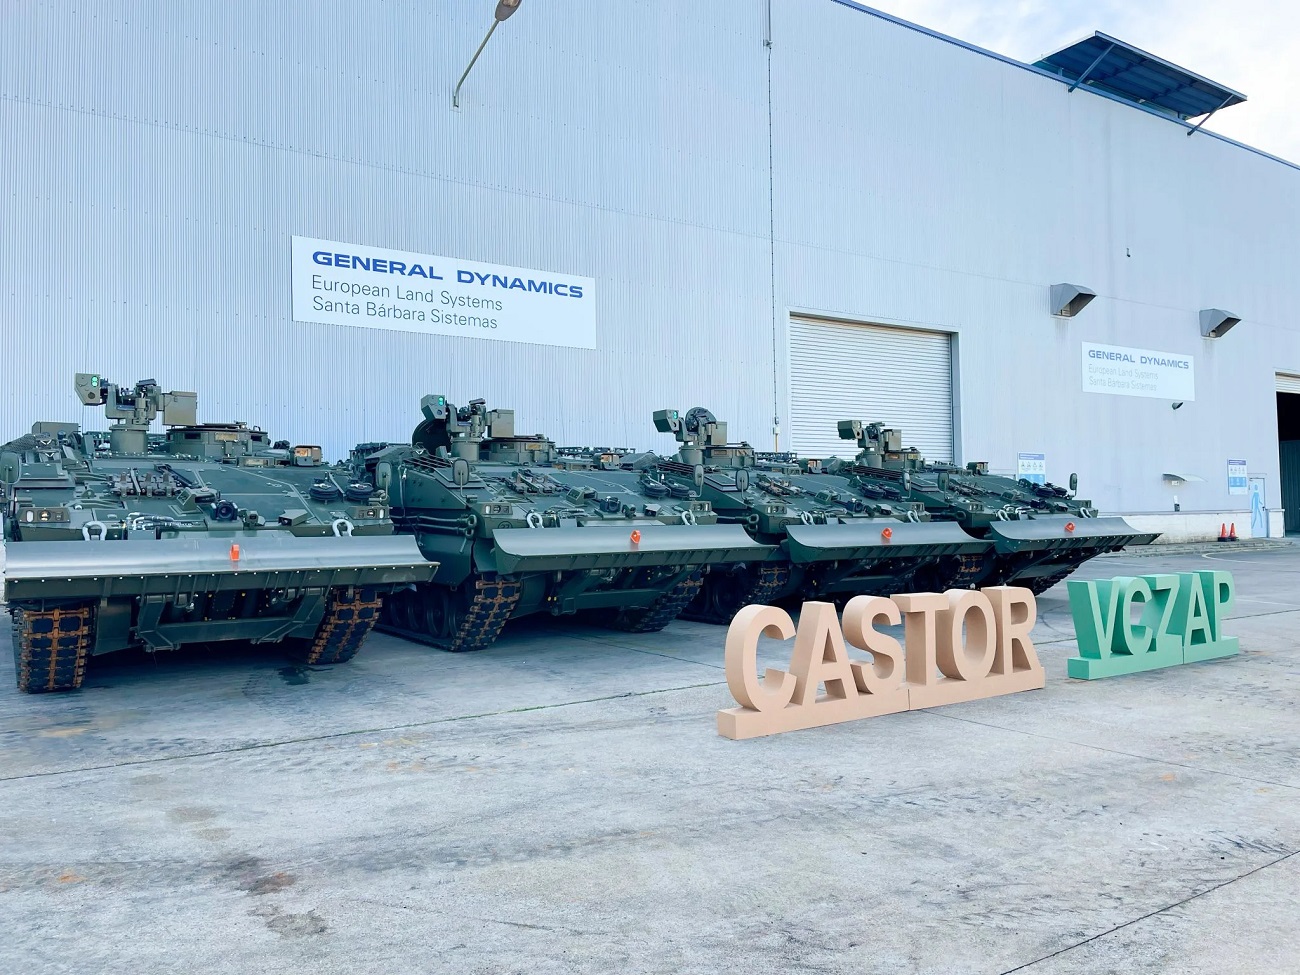 Spanish Army Receives ASCOD VCZAP Castor Armored Engineering Combat Vehicles